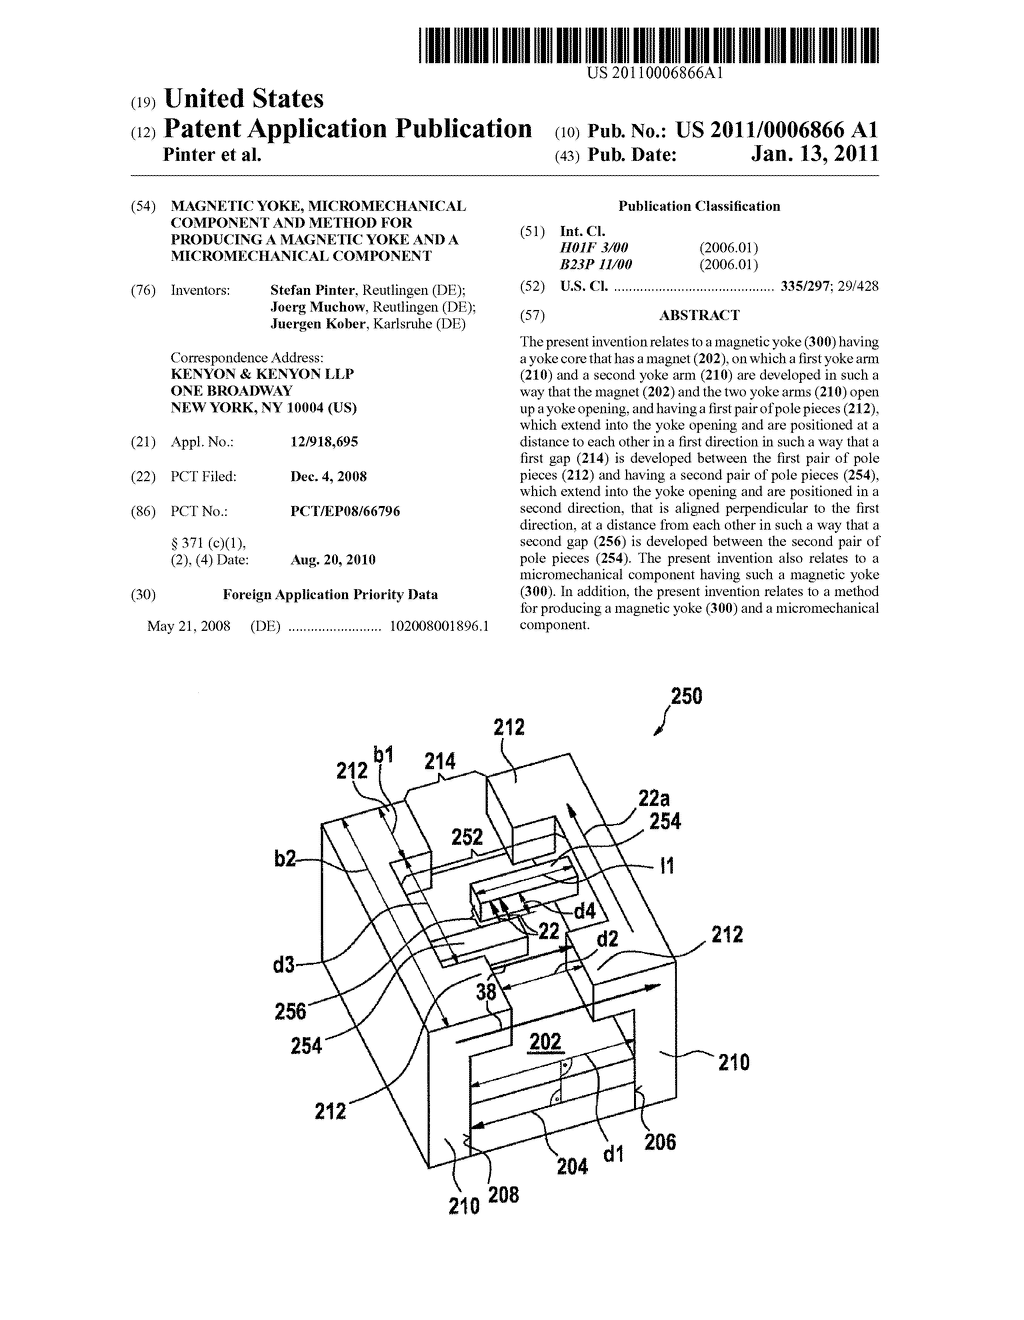 MAGNETIC YOKE, MICROMECHANICAL COMPONENT AND METHOD FOR PRODUCING A MAGNETIC YOKE AND A MICROMECHANICAL COMPONENT - diagram, schematic, and image 01